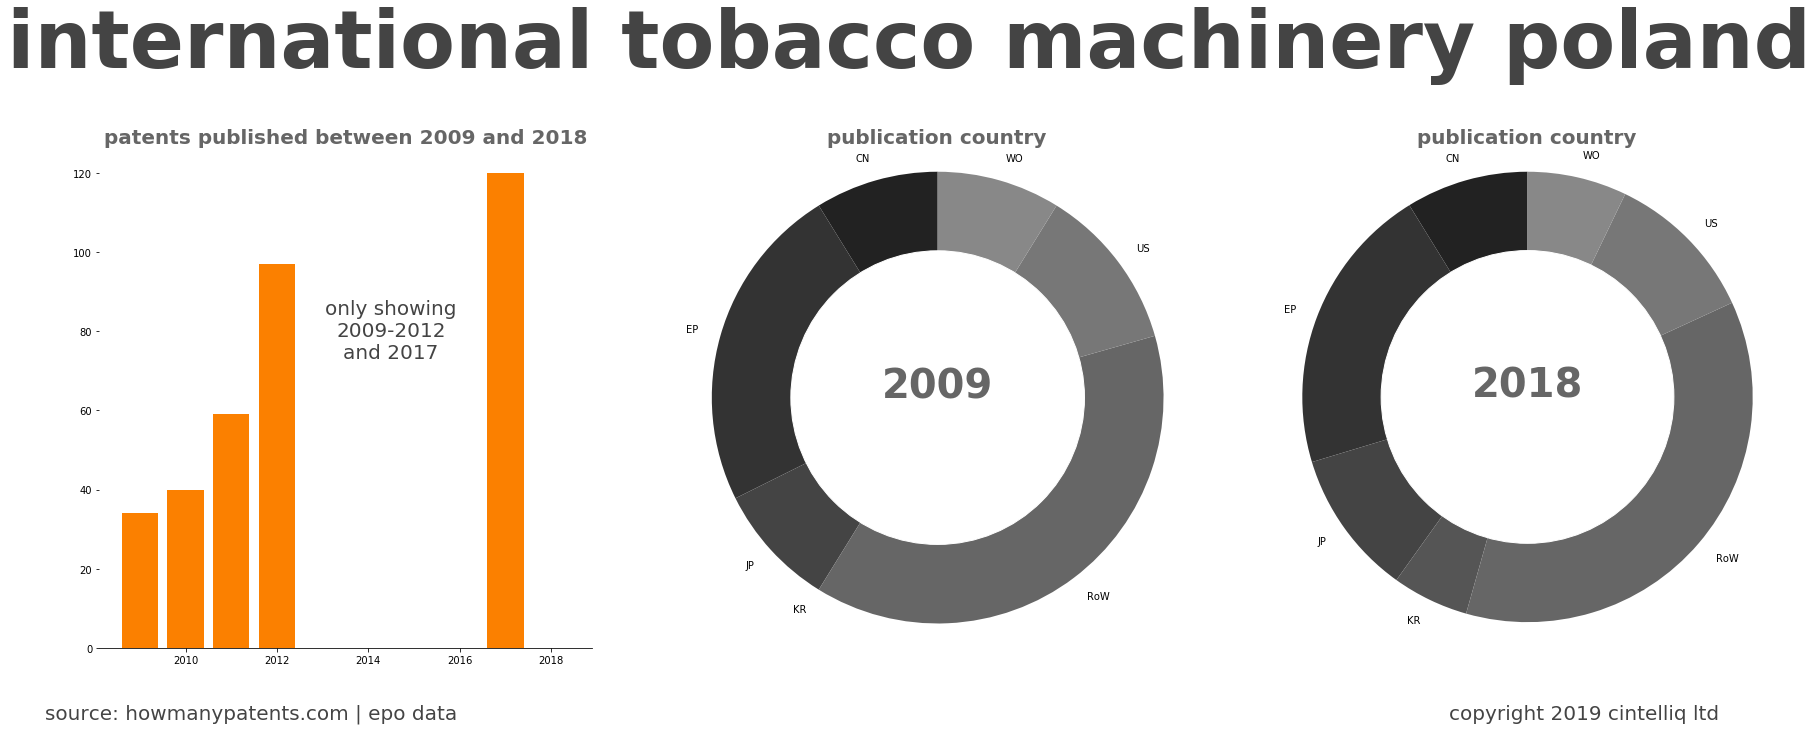 summary of patents for International Tobacco Machinery Poland